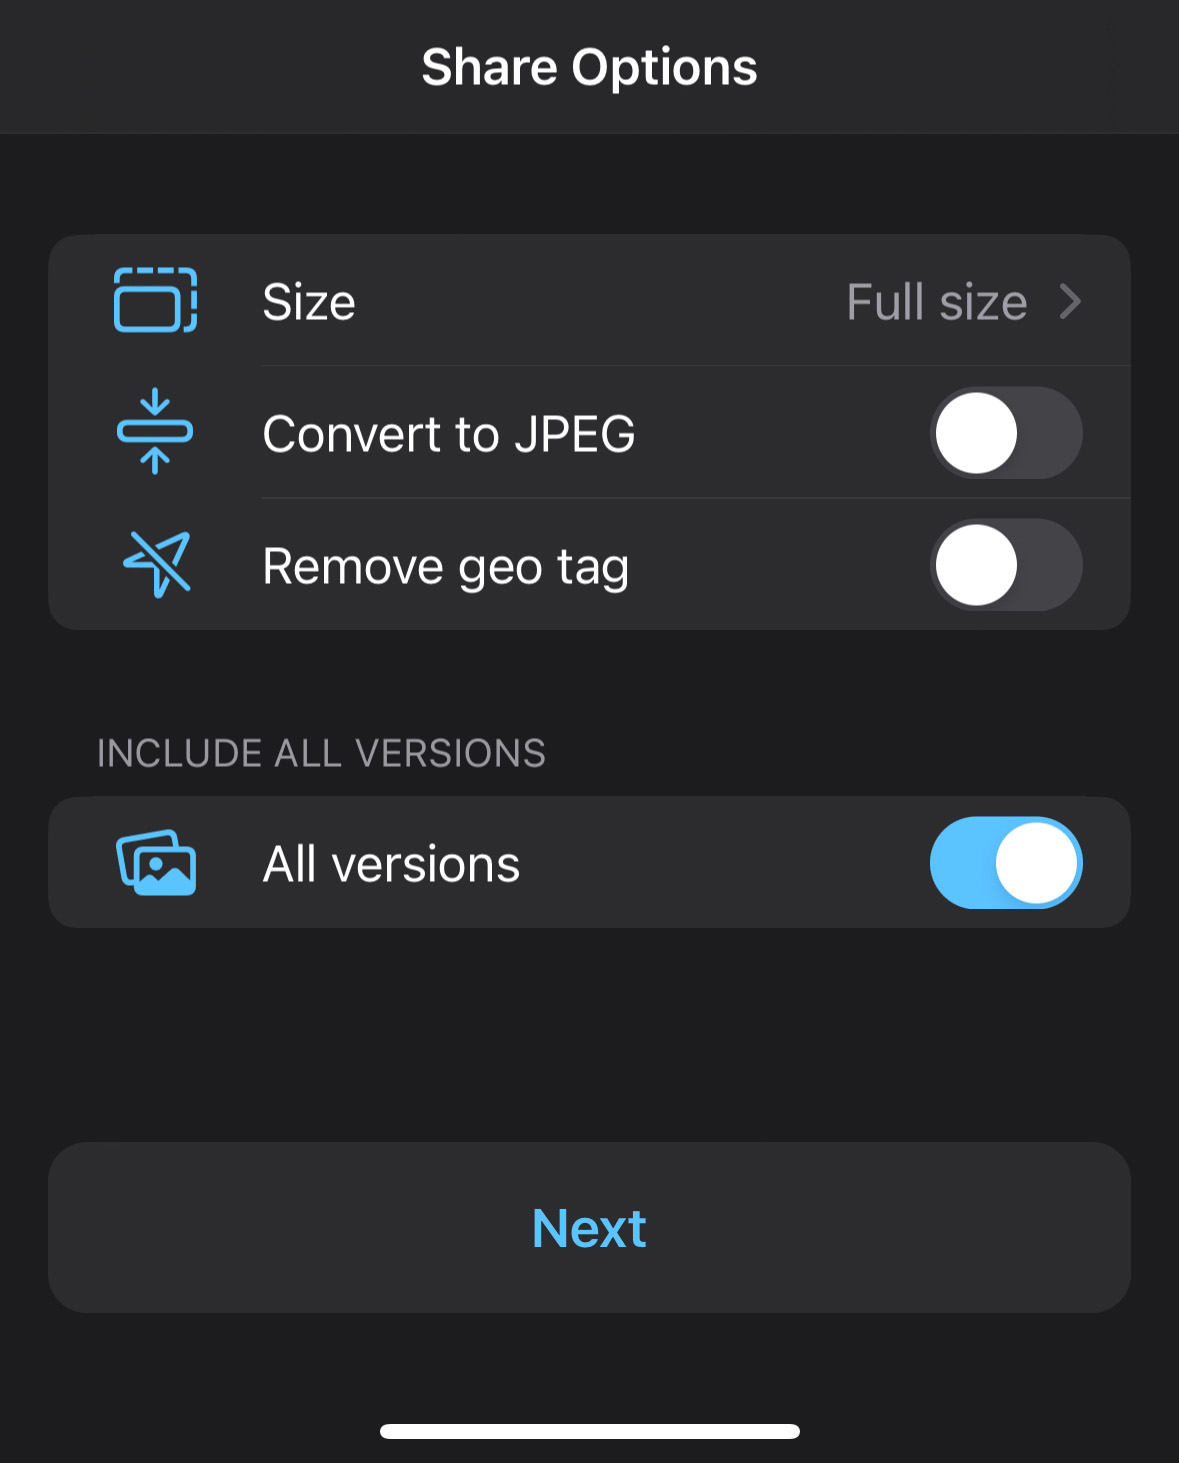 ProCamera App's Share Options Menu with the new Share All Version option.